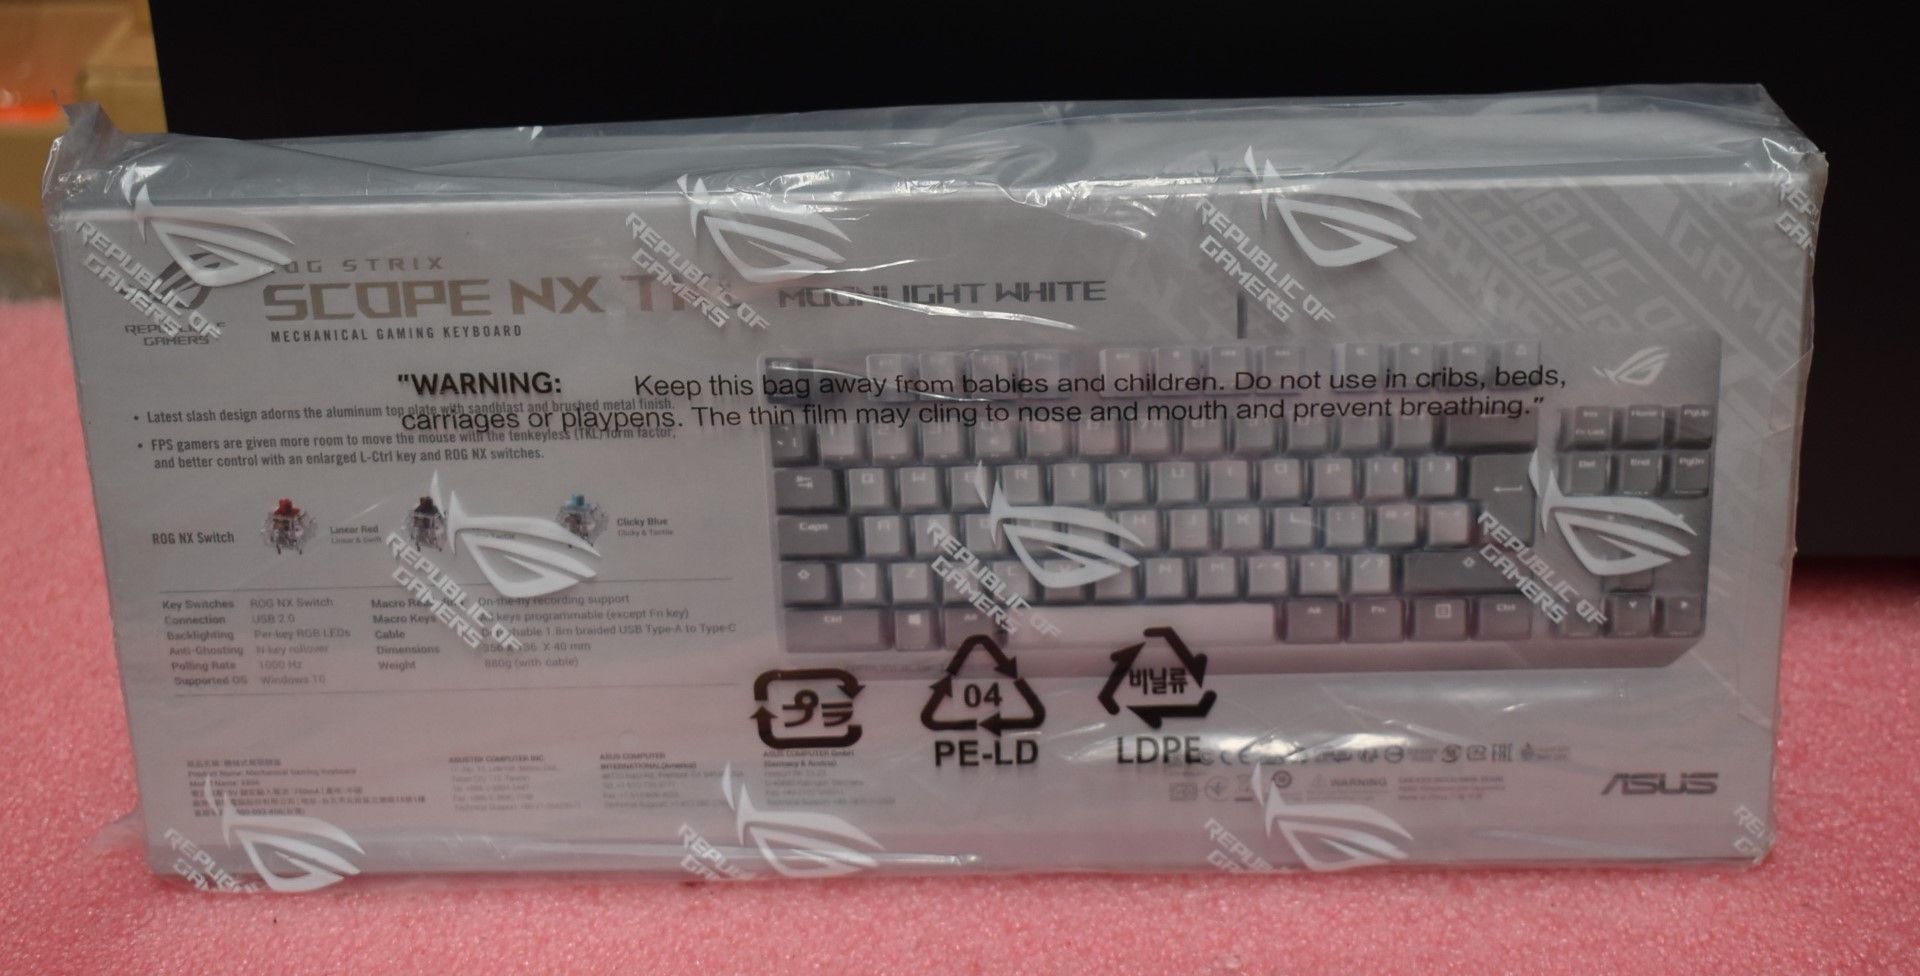 1 x Asus ROG Strix Scope NX TKL Moonlight White Wired Mechanical RGB Gaming Keyboard - Features - Image 3 of 6